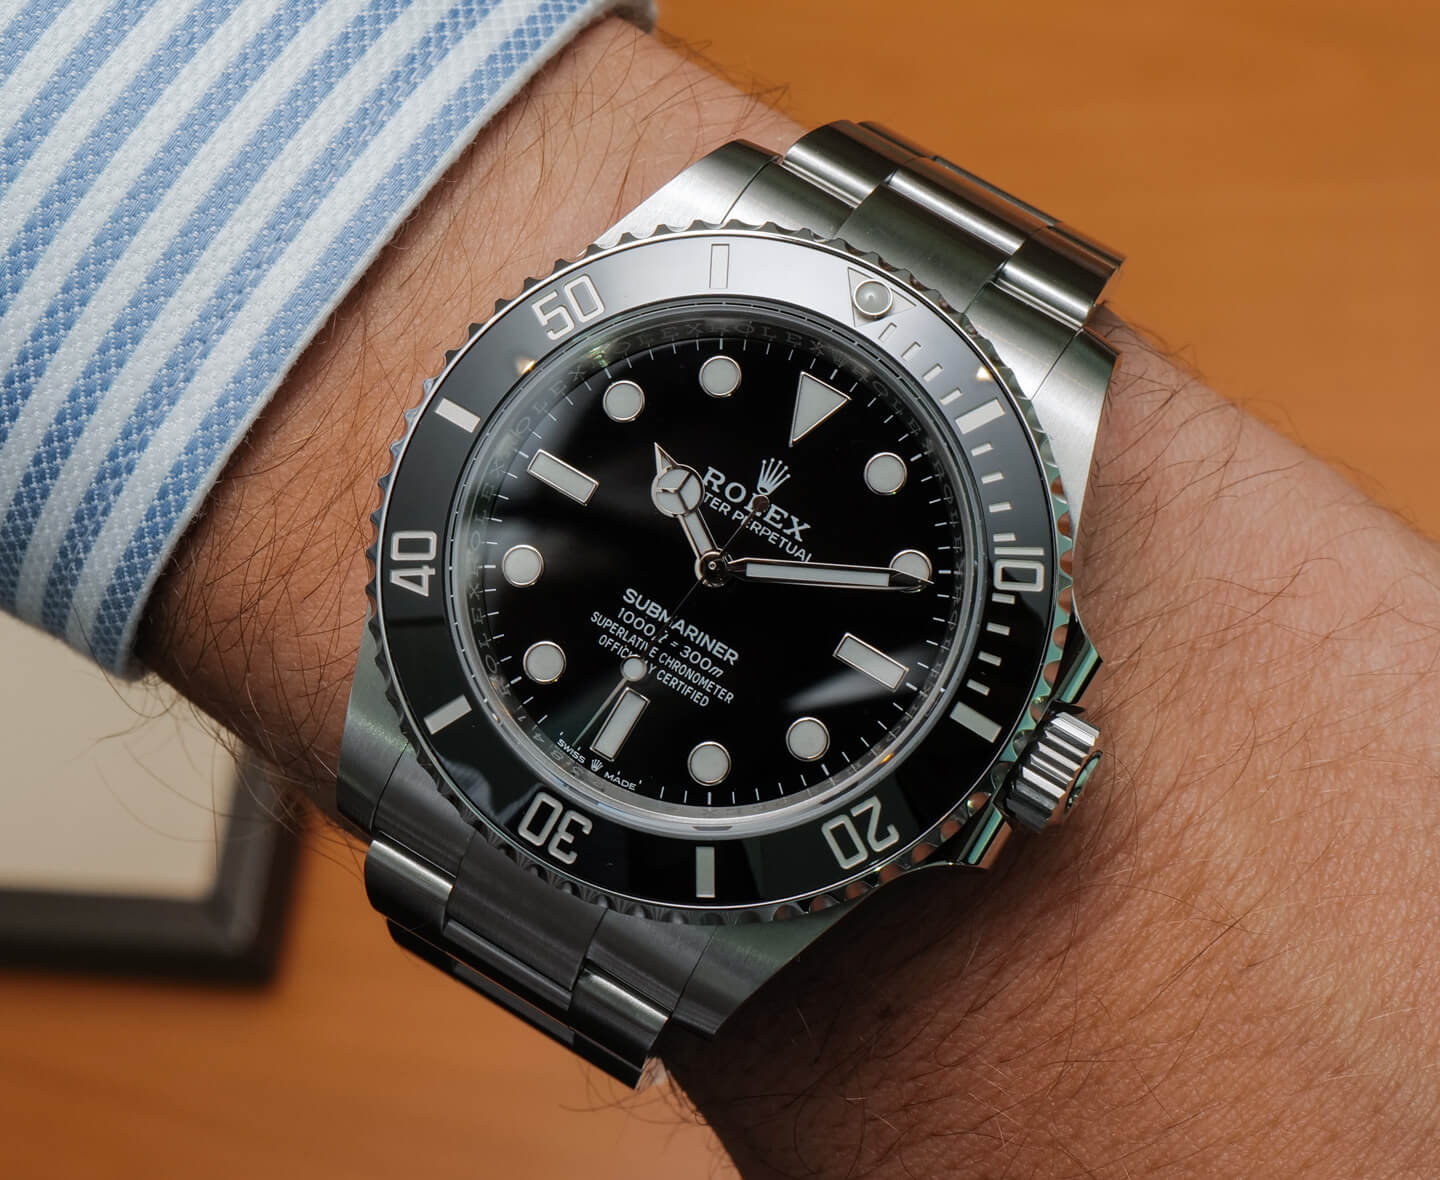 Hands-On: Rolex 'No Date' 124060 Watch For 2020 | aBlogtoWatch